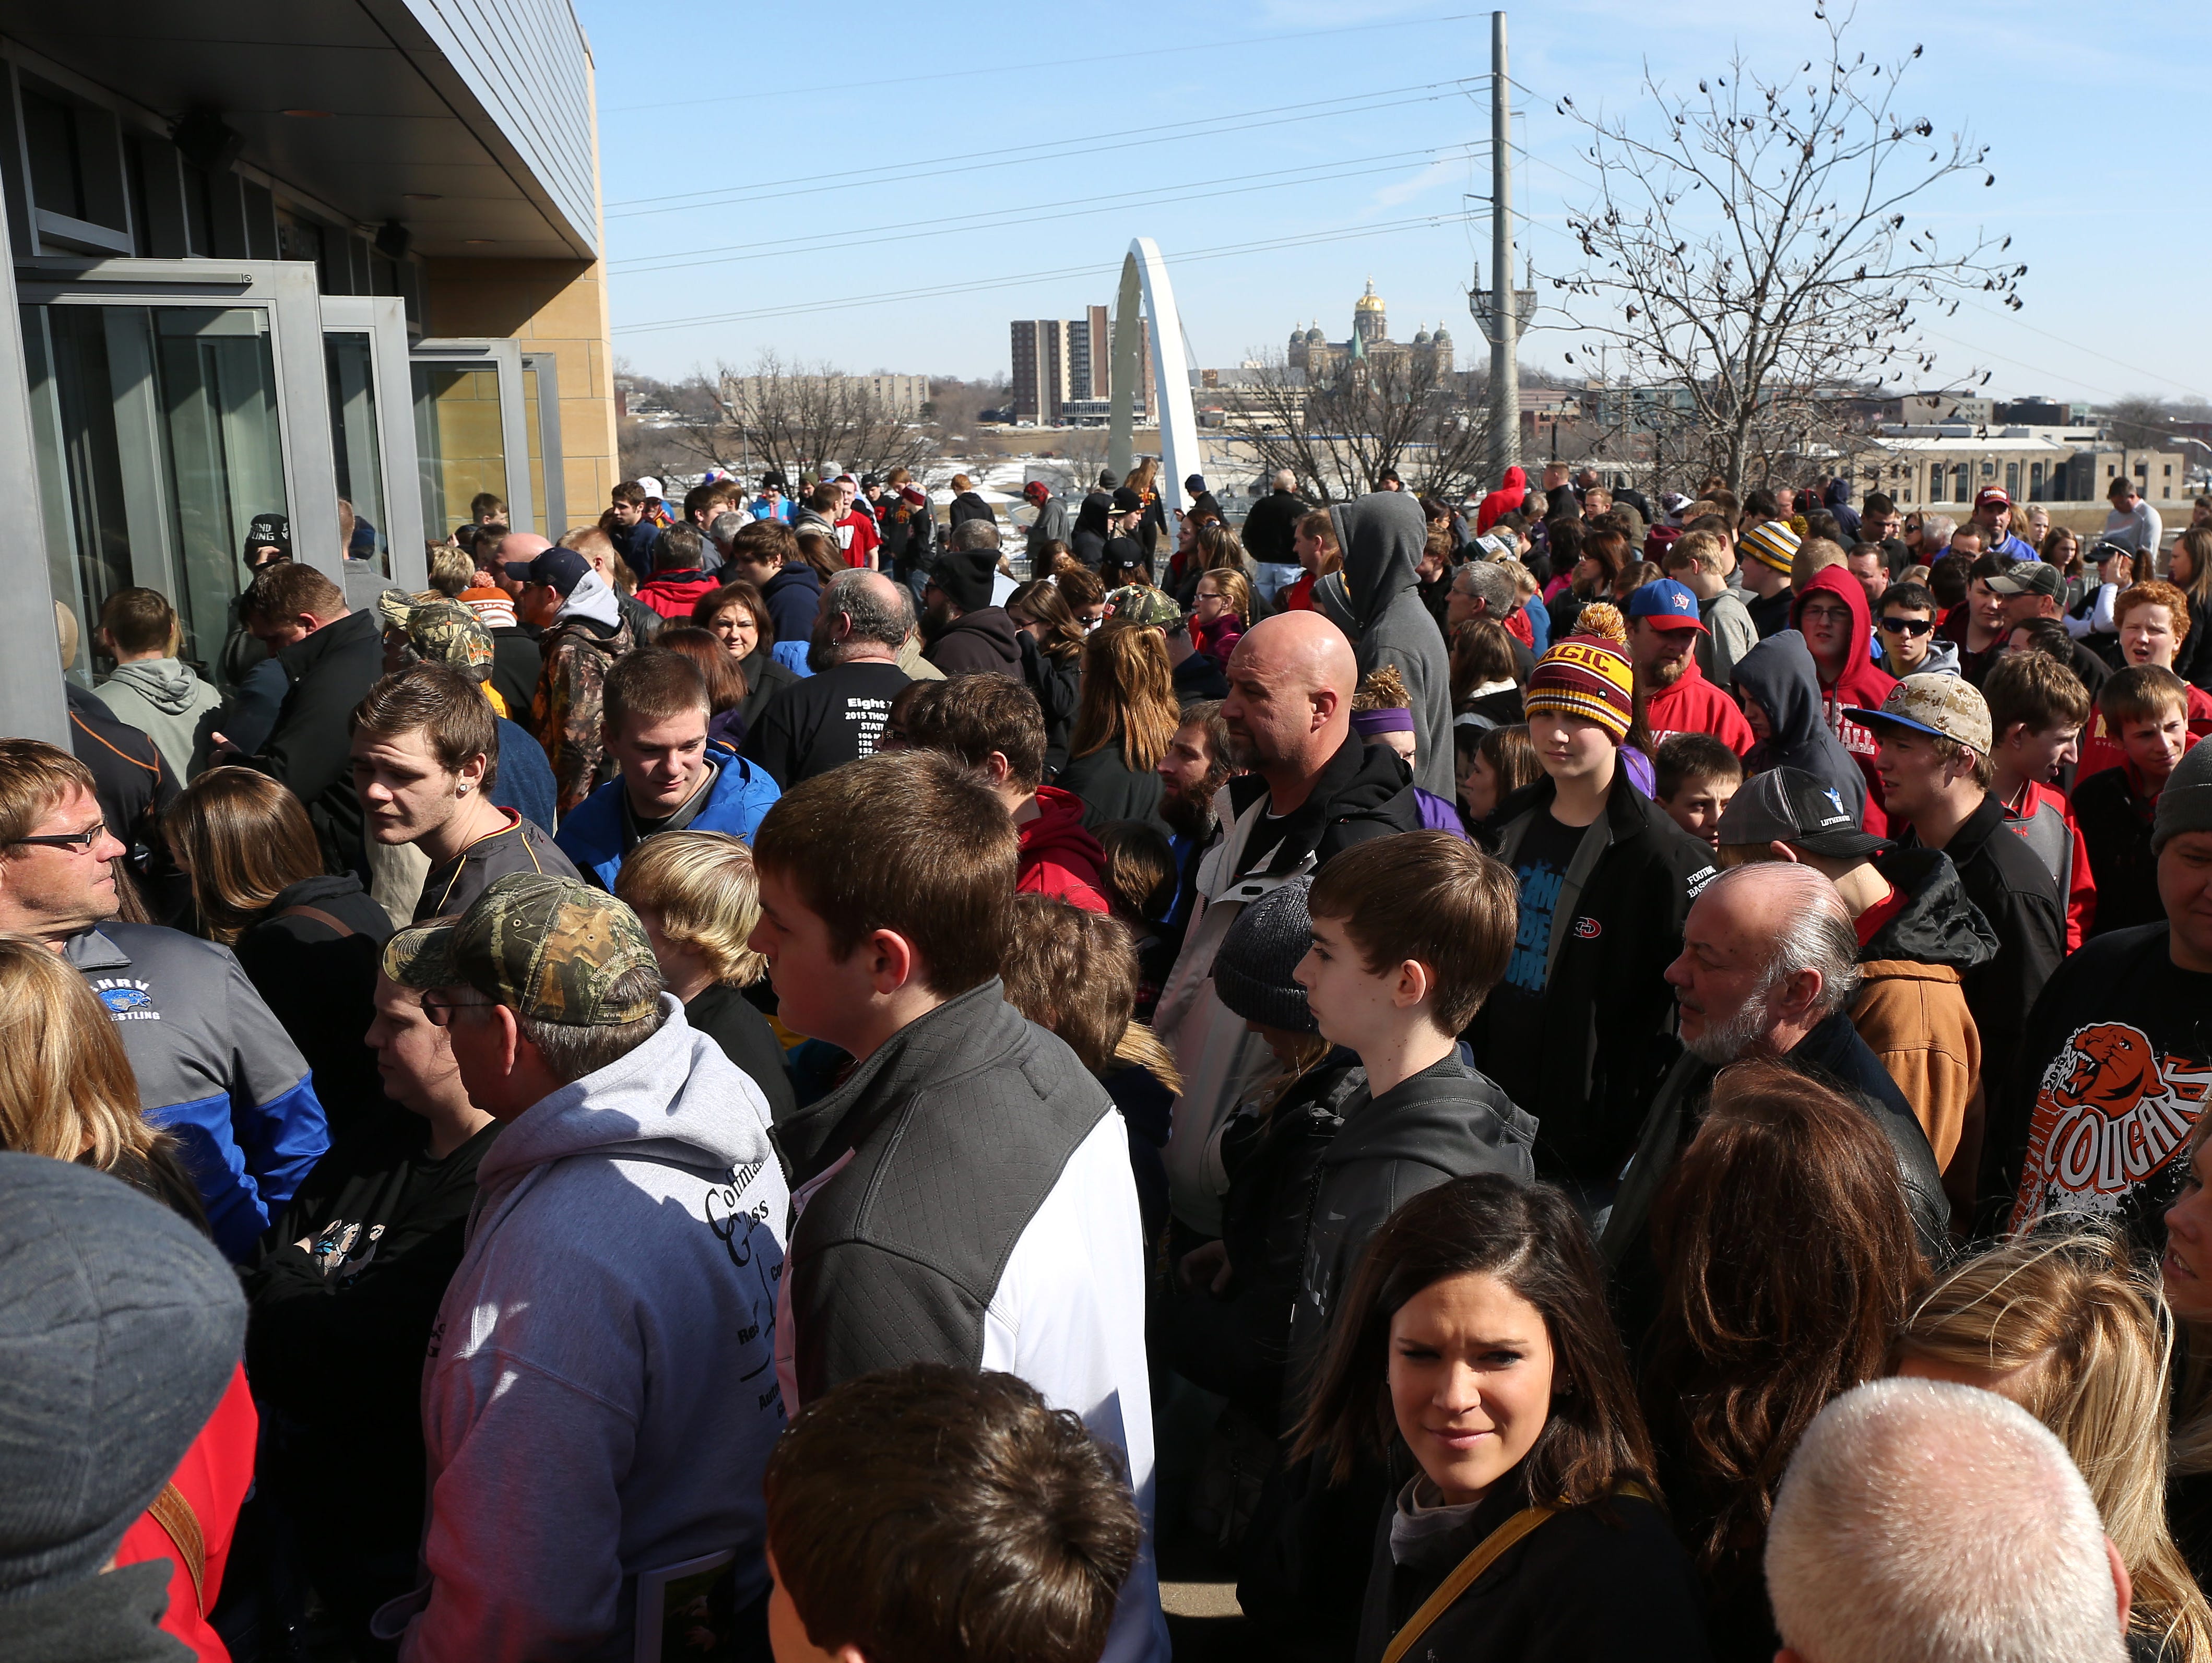 Fans begin to file into Wells Fargo Arena for the afternoon session on Friday, Feb. 20, 2015, during the 2015 Iowa state wrestling meet in Des Moines, Iowa.